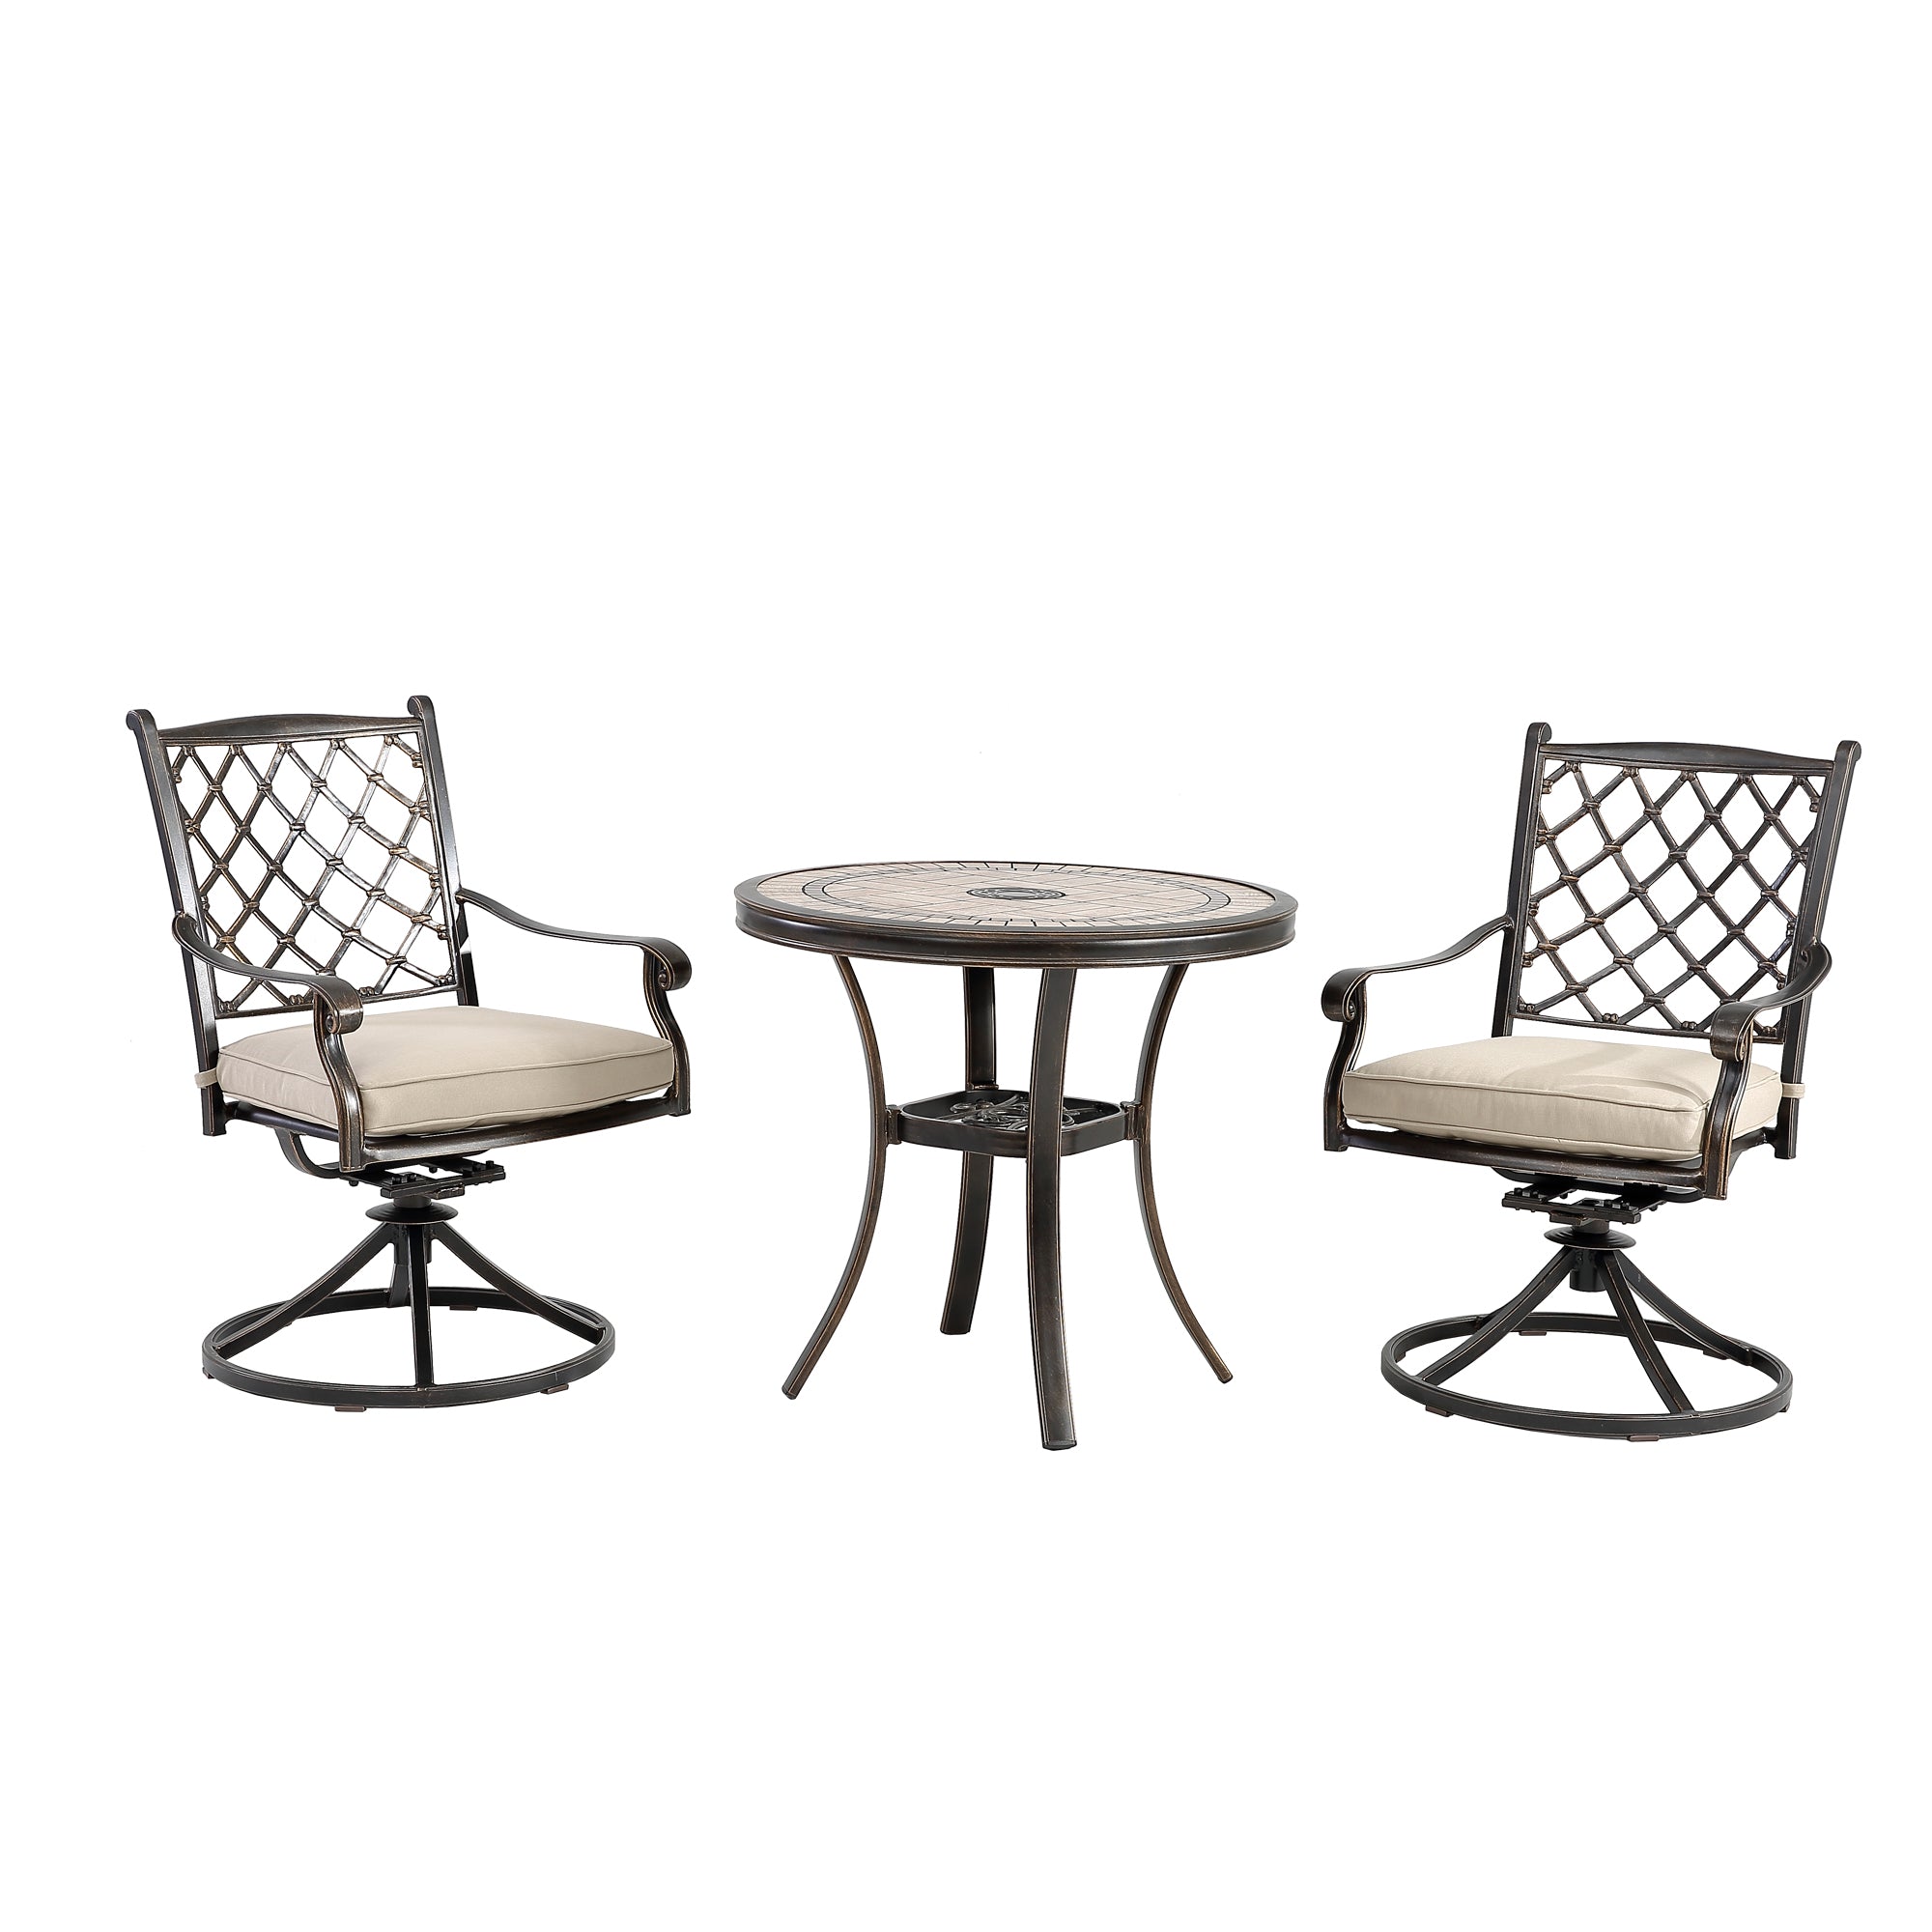 3-piece cast aluminum dining chair set Tile-Top Dining Table and mesh-back  swivel chair